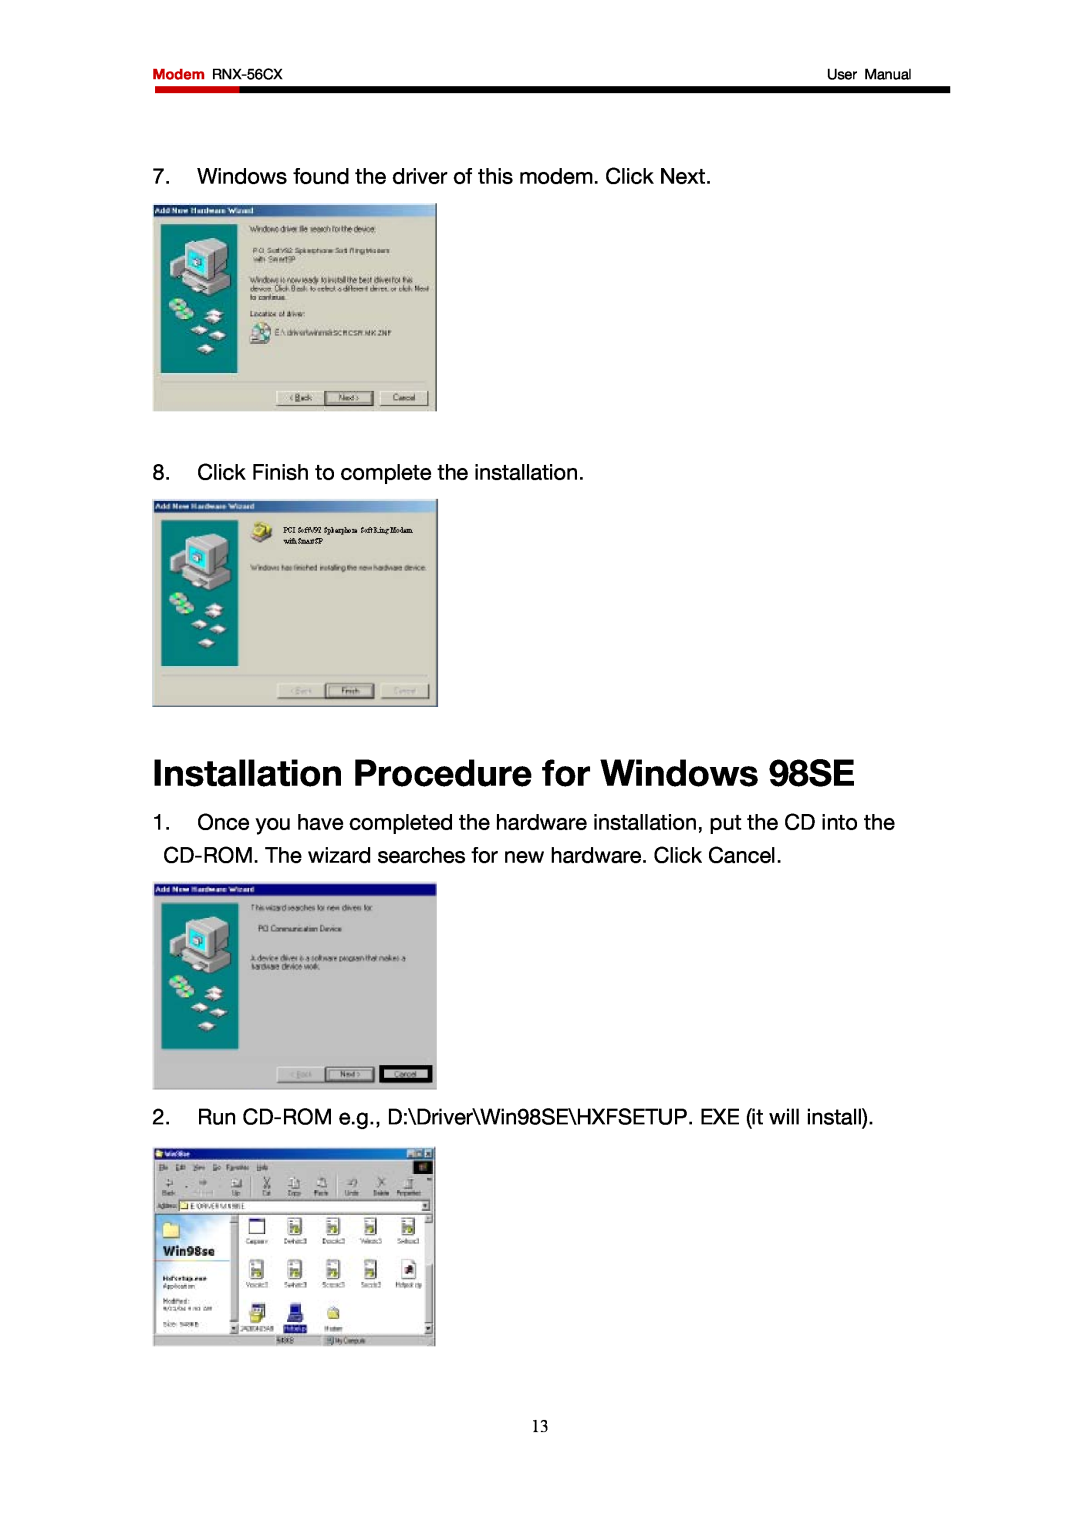 Rosewill RNX-56CX Installation Procedure for Windows 98SE, Windows found the driver of this modem. Click Next, User Manual 